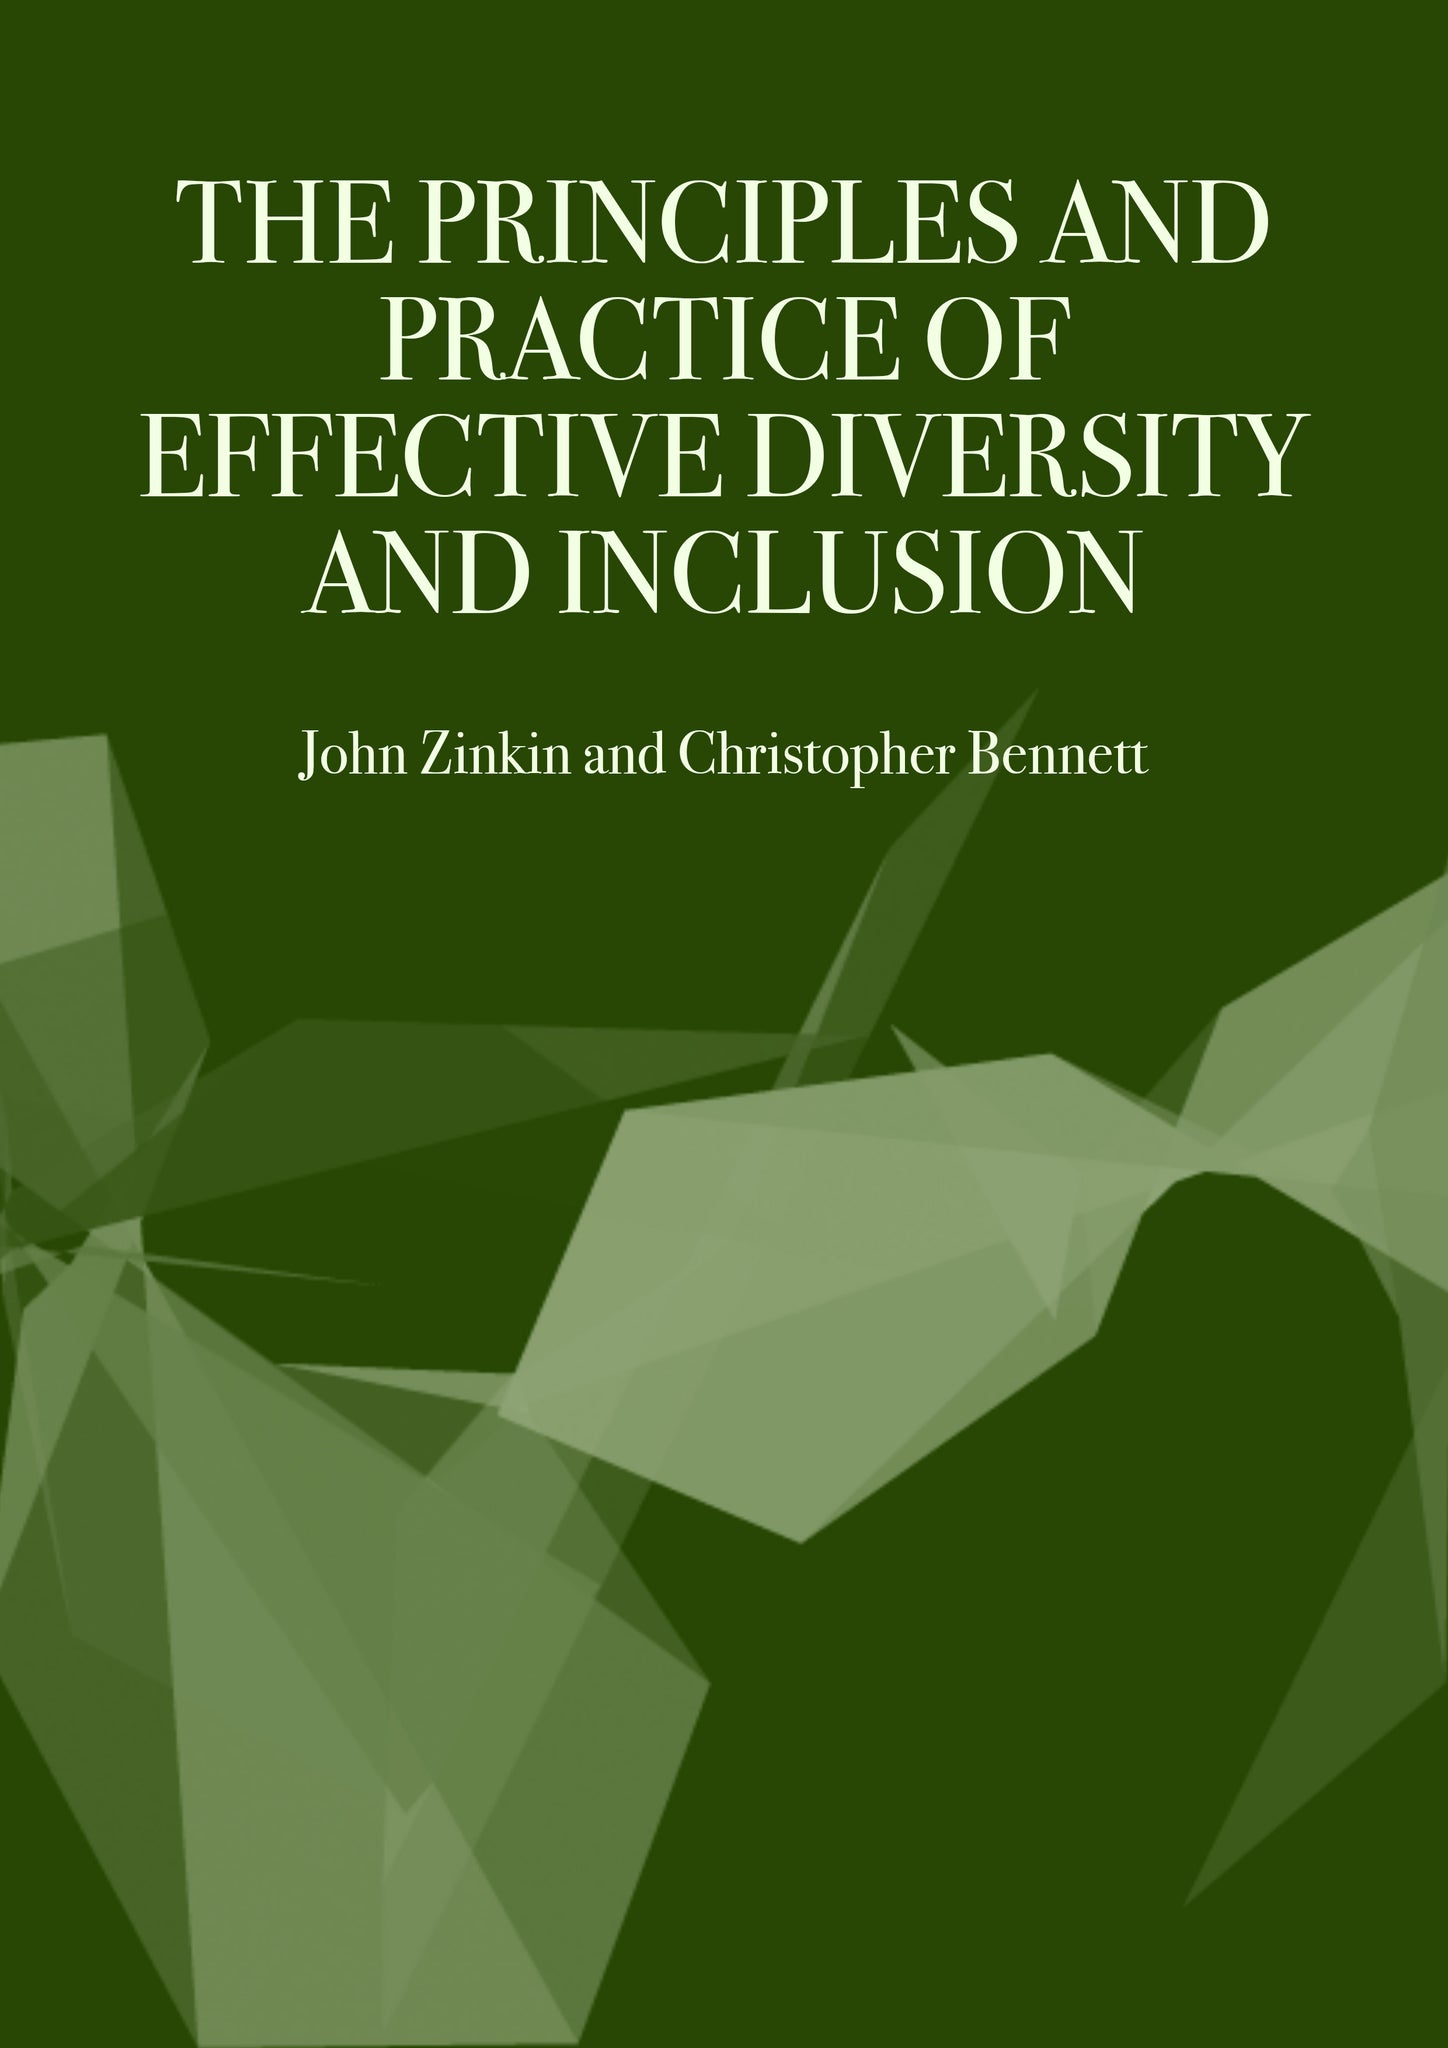 The Principles and Practice of Effective Diversity and Inclusion